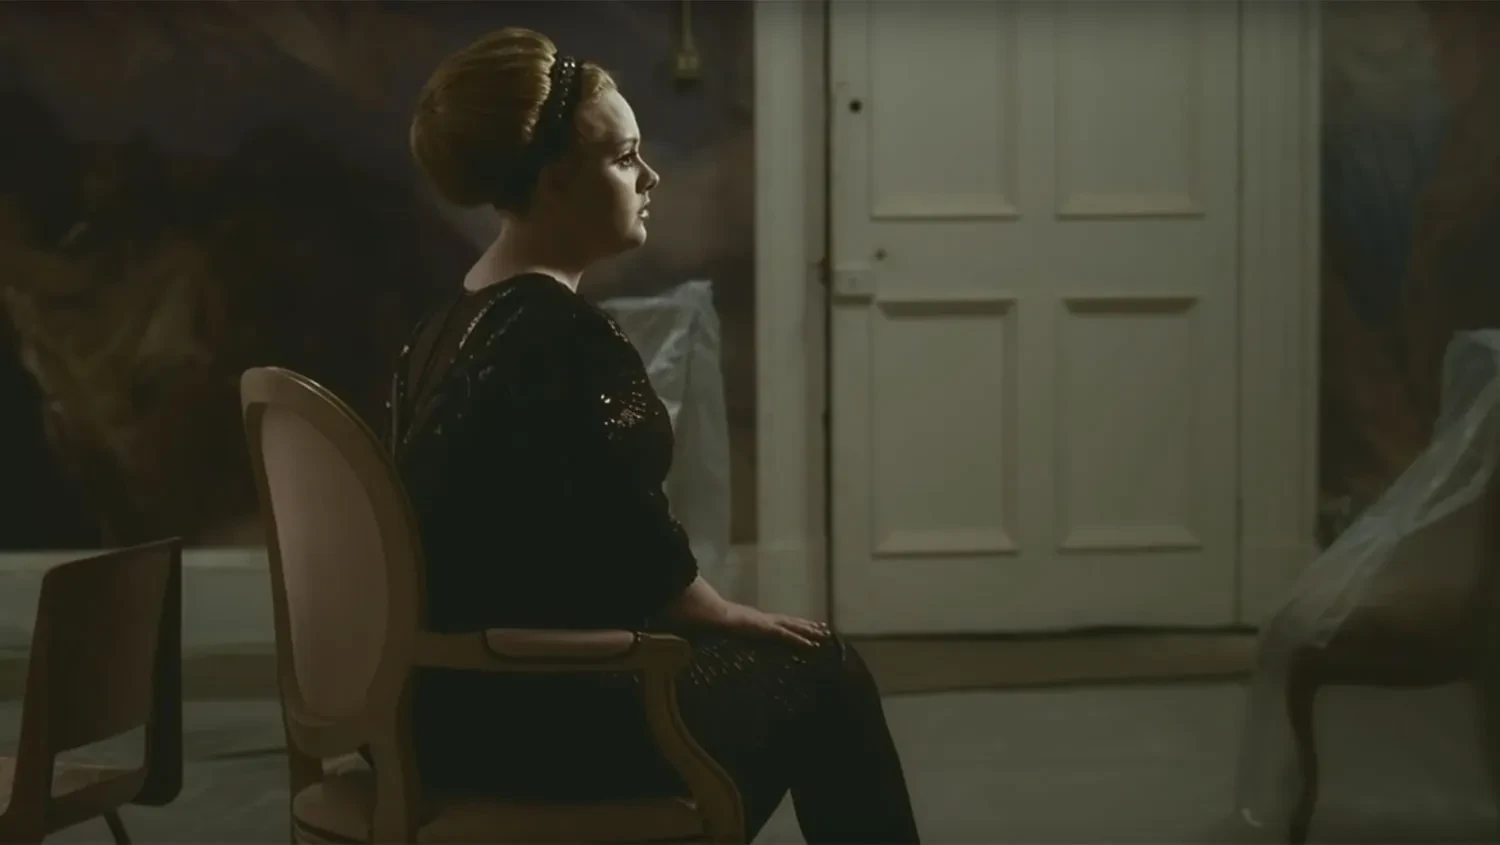 Adele in the music video of Rolling in the Deep